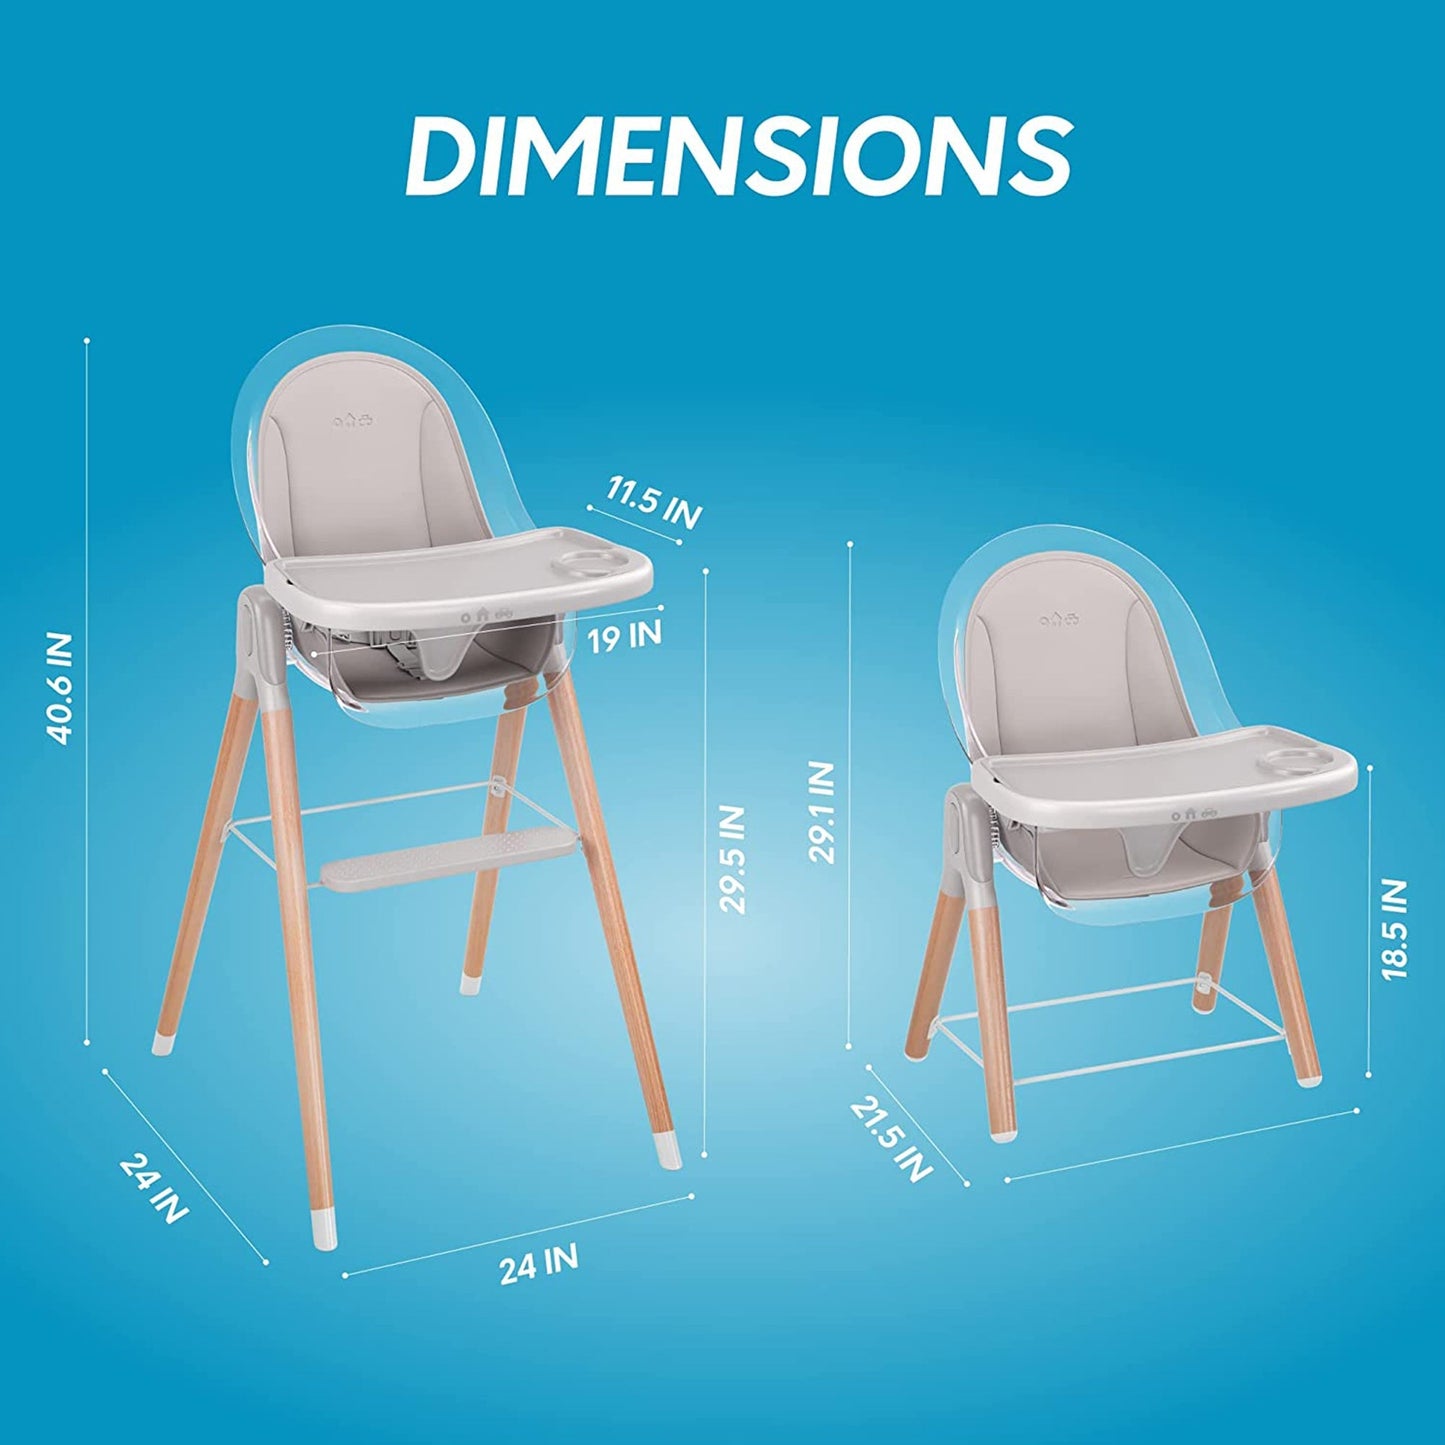 Children of Design 6 in 1 Deluxe Wooden High Chair for Babies & Toddlers, Modern Safe & Compact Baby Highchair